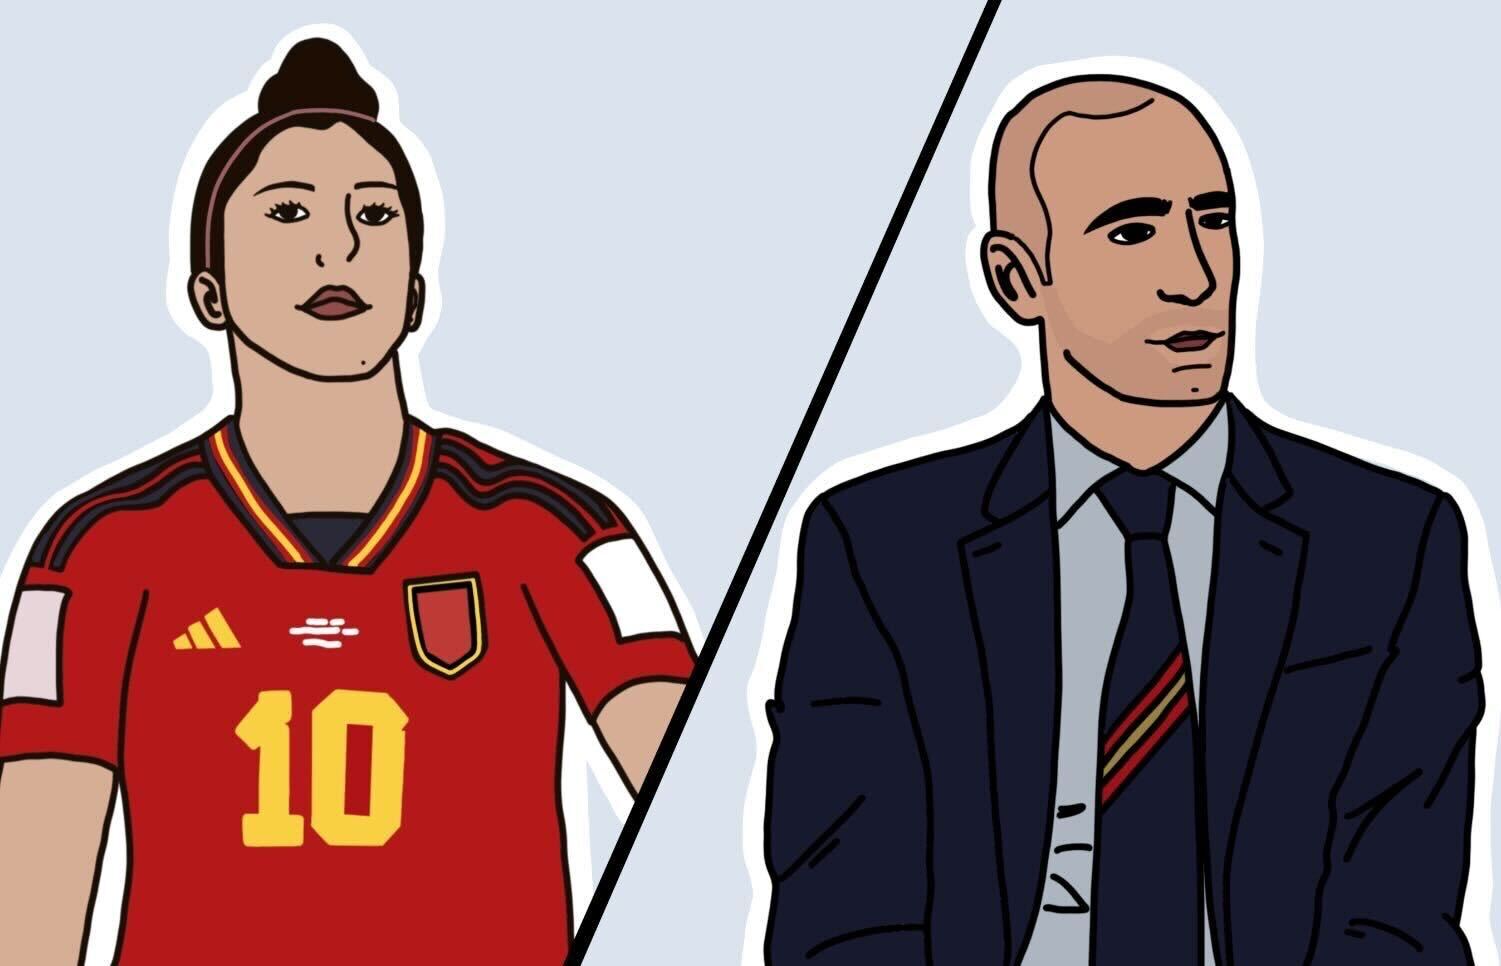 After the Spanish Womens Soccer team won the Womens World Cup, former Royal Spanish Football  Federation president Luis Rubiales cast a shadow over the accomplishments of the Spanish Women’s team by kissing player Jennifer Hermoso without her consent. Rubiales has yet to face major consequences.